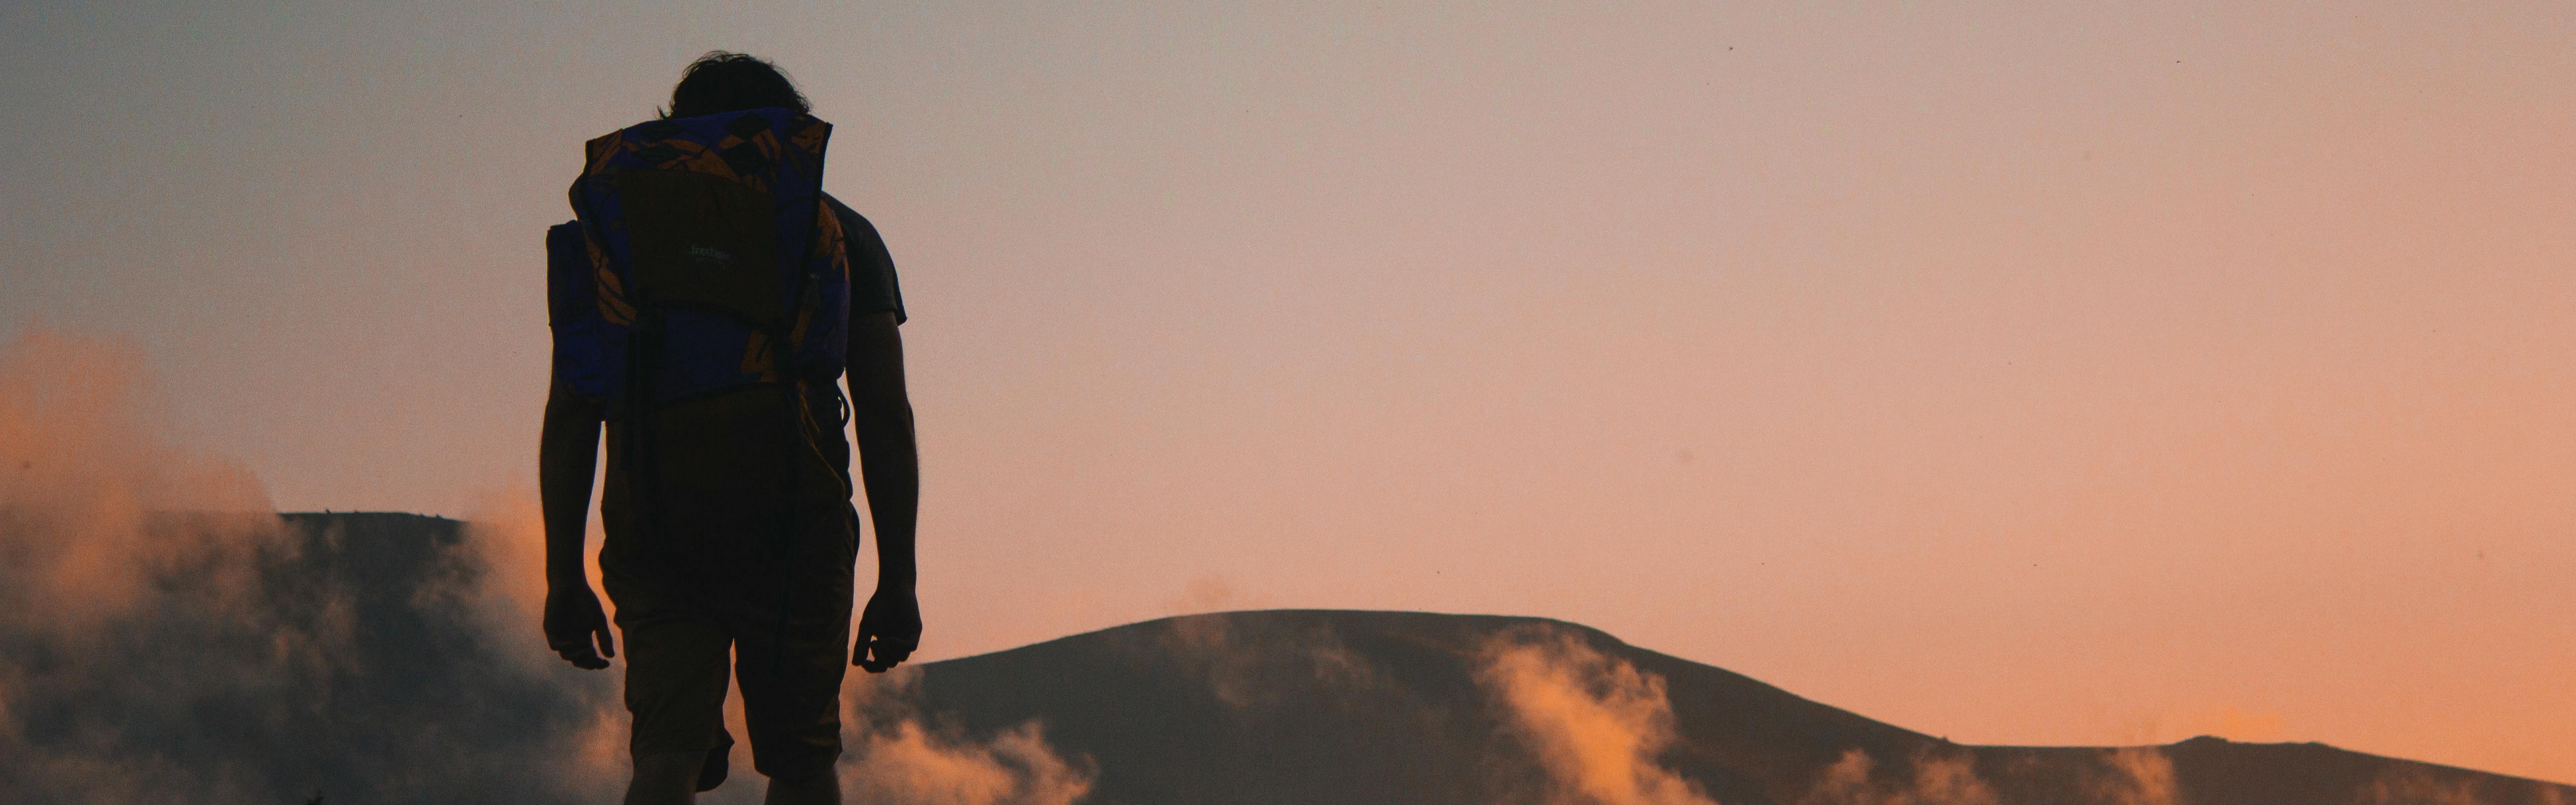 A person with a backpack is silhouetted from behind with sunset hills in front of him.